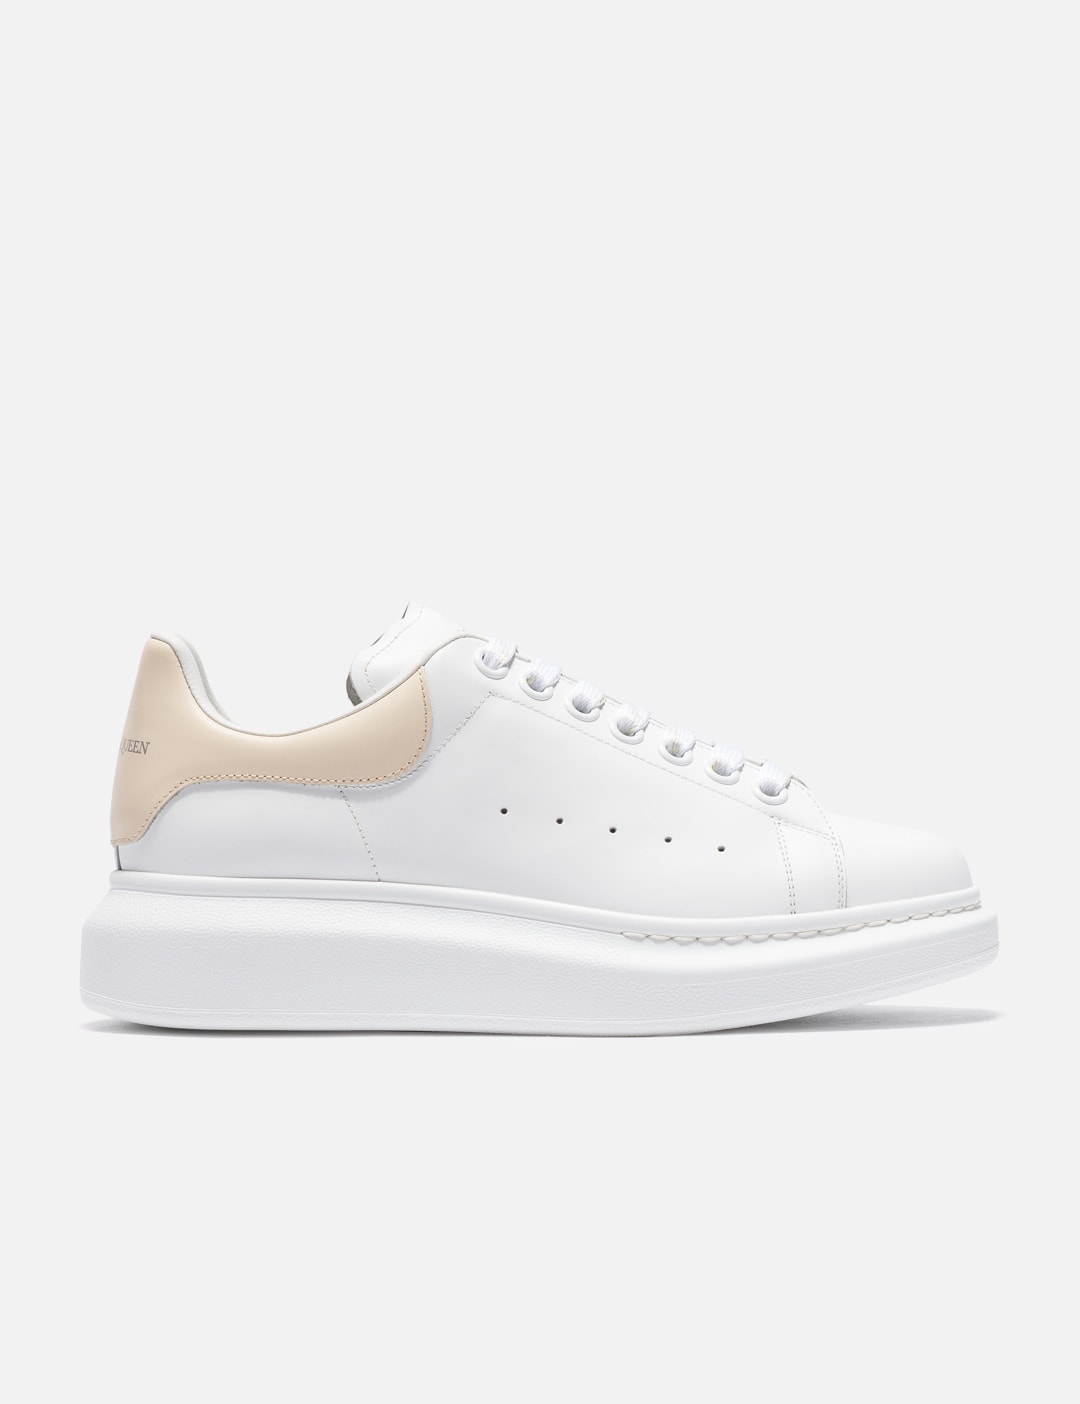 Alexander McQueen - Oversized Sneakers | HBX - Globally Curated Fashion ...